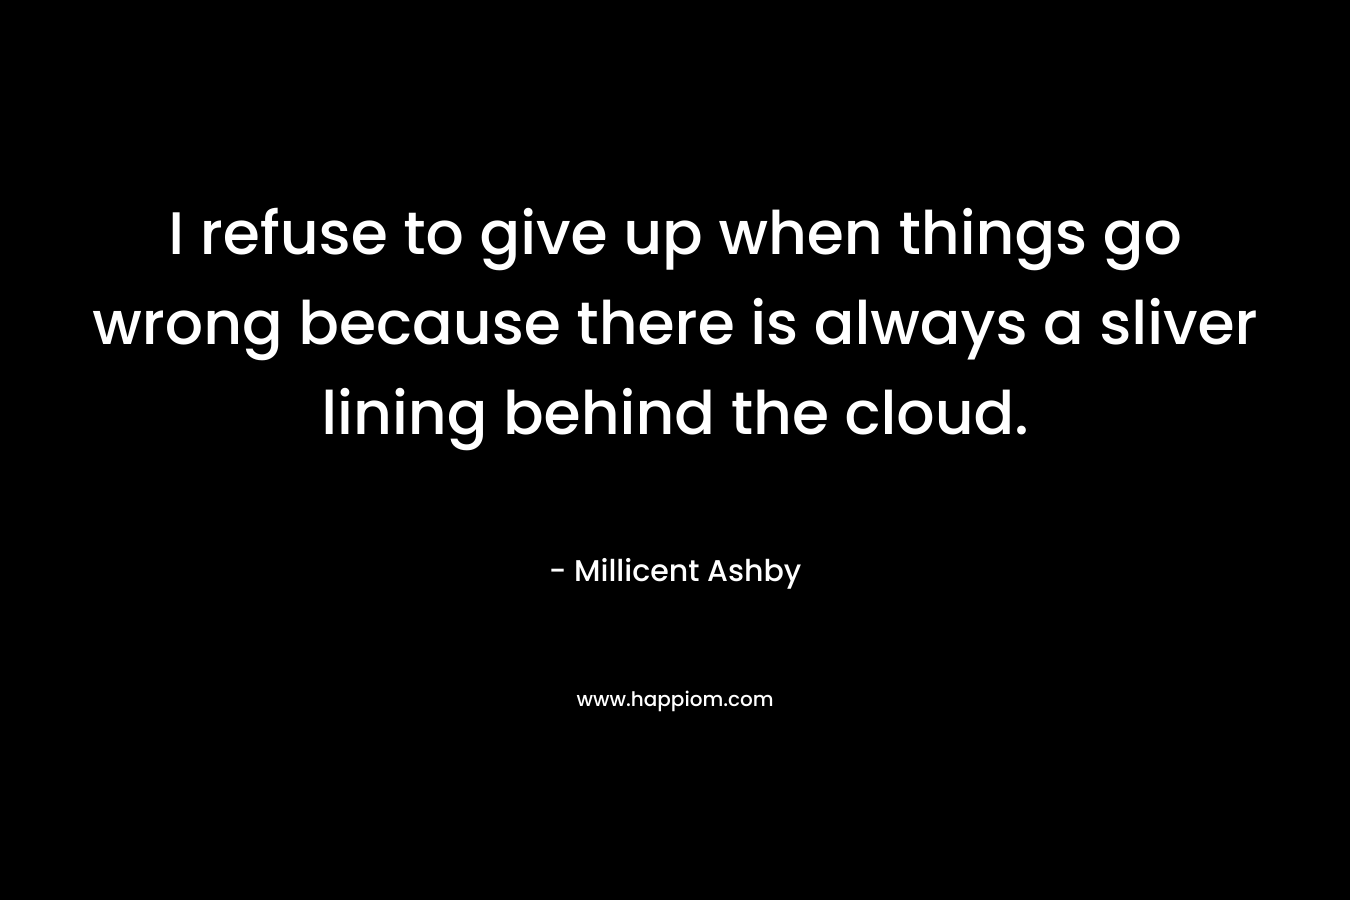 I refuse to give up when things go wrong because there is always a sliver lining behind the cloud.